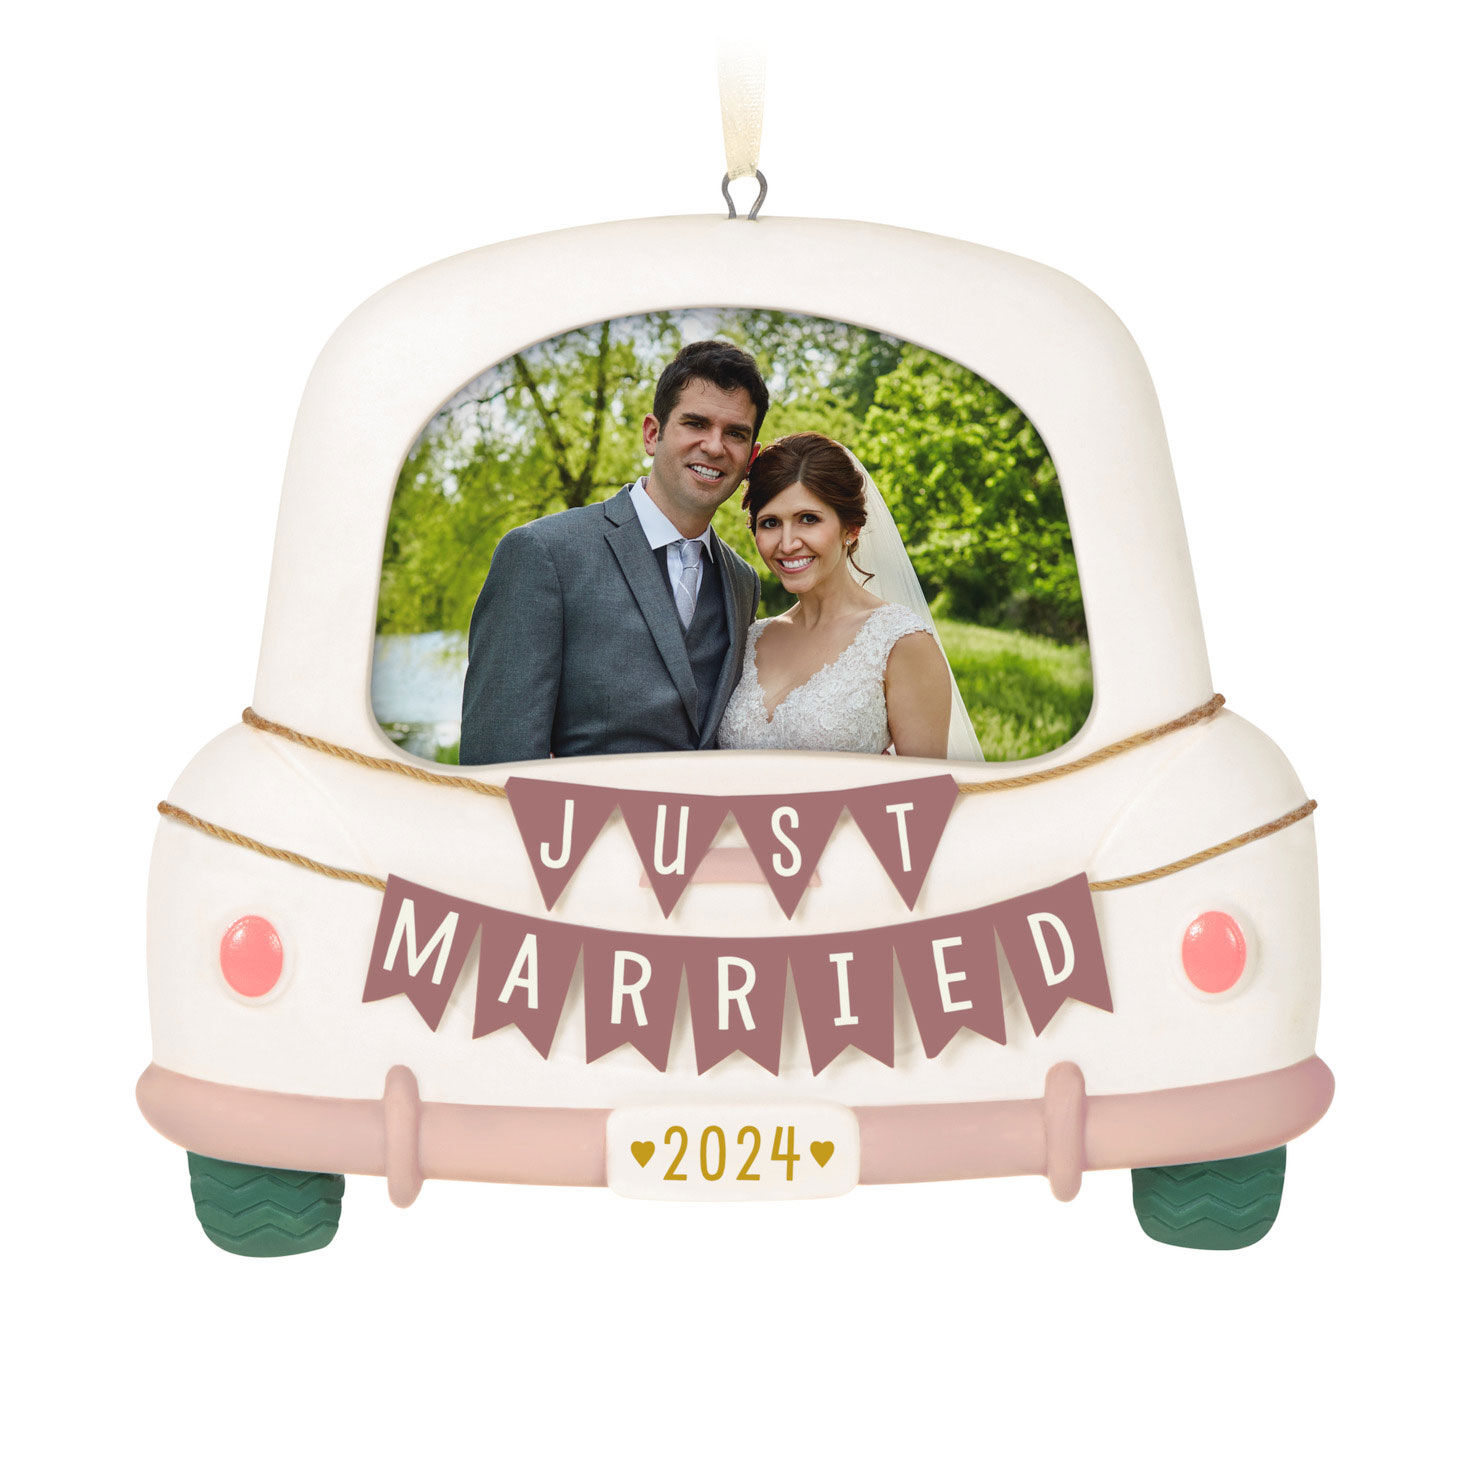 Just Married 2024 Porcelain Photo Frame Ornament for only USD 19.99 | Hallmark